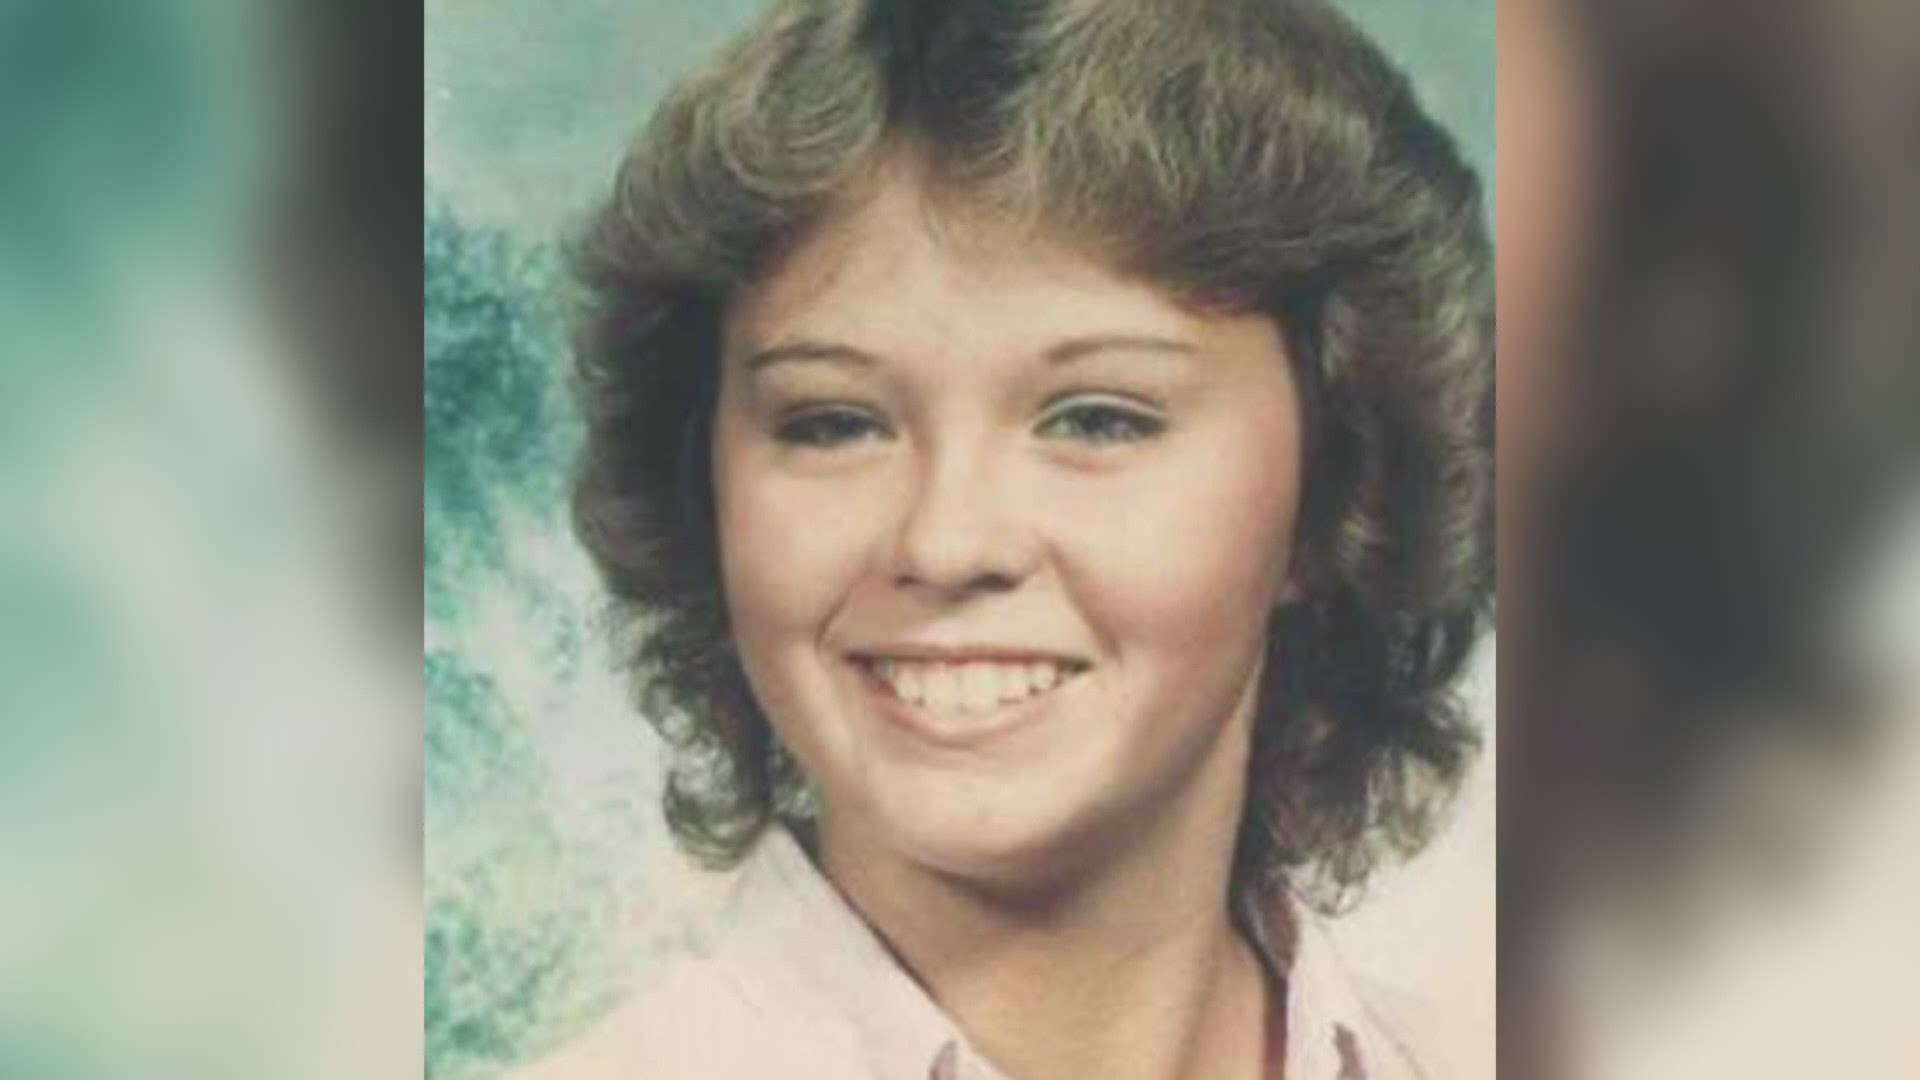 Kimberly Moreau of Jay has been missing since 1986, and was 17 years-old at the time of her disappearance.